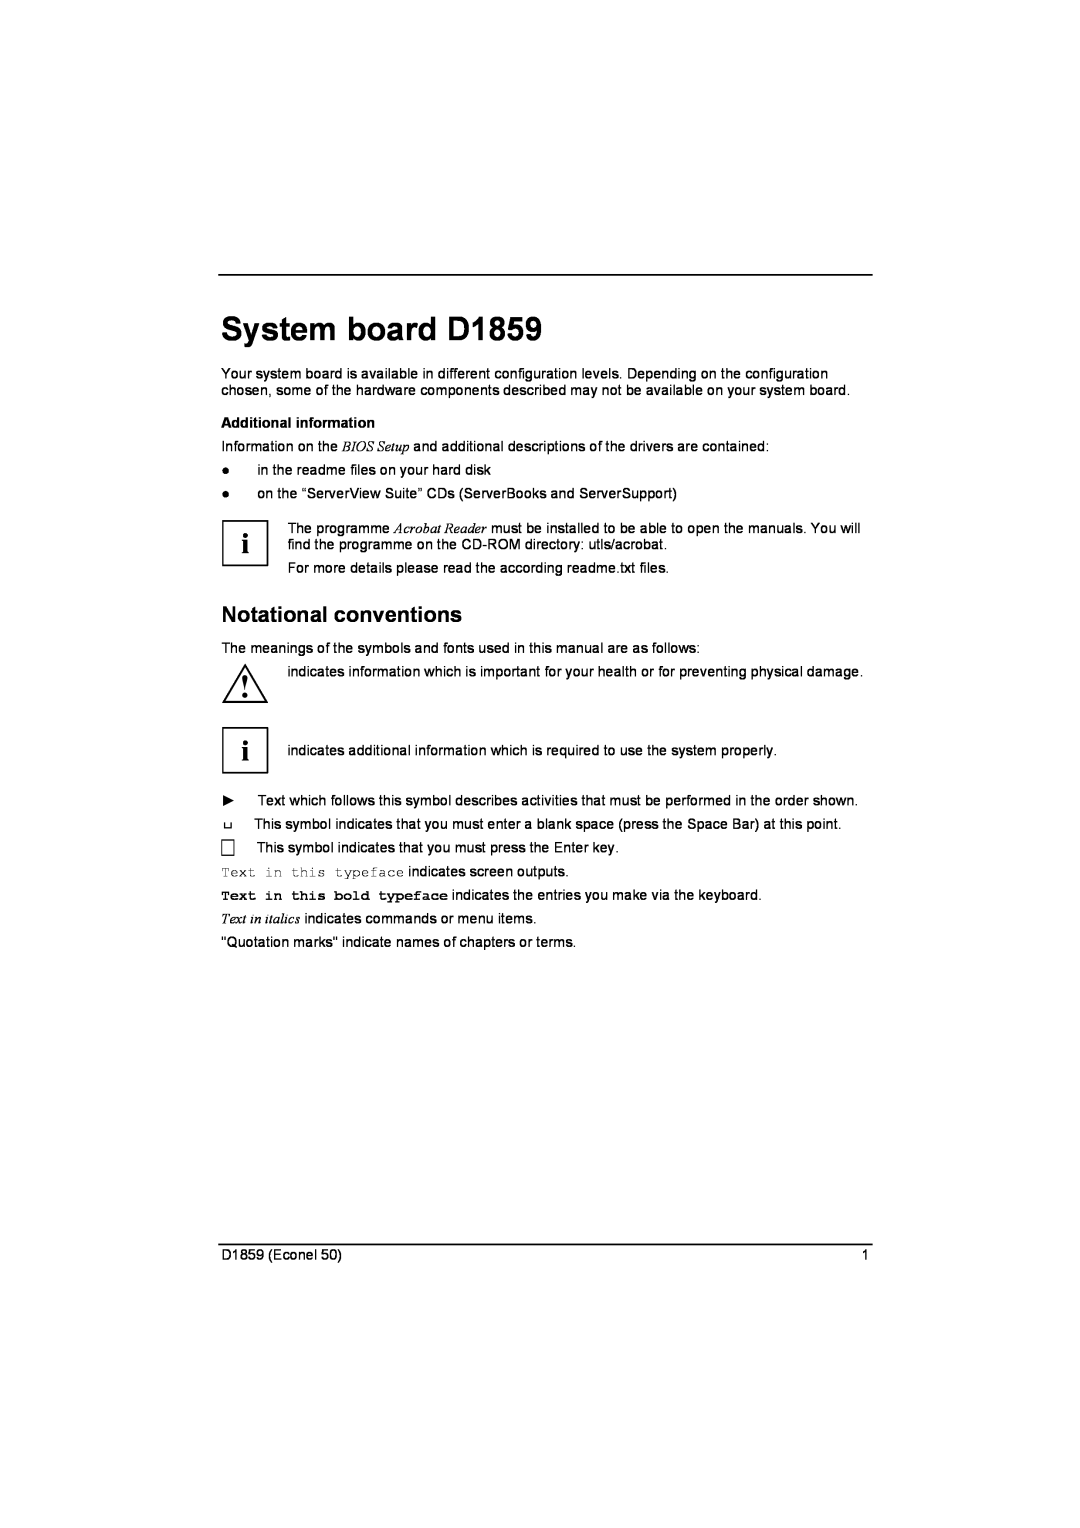 Fujitsu technical manual System board D1859, Notational conventions, Additional information 